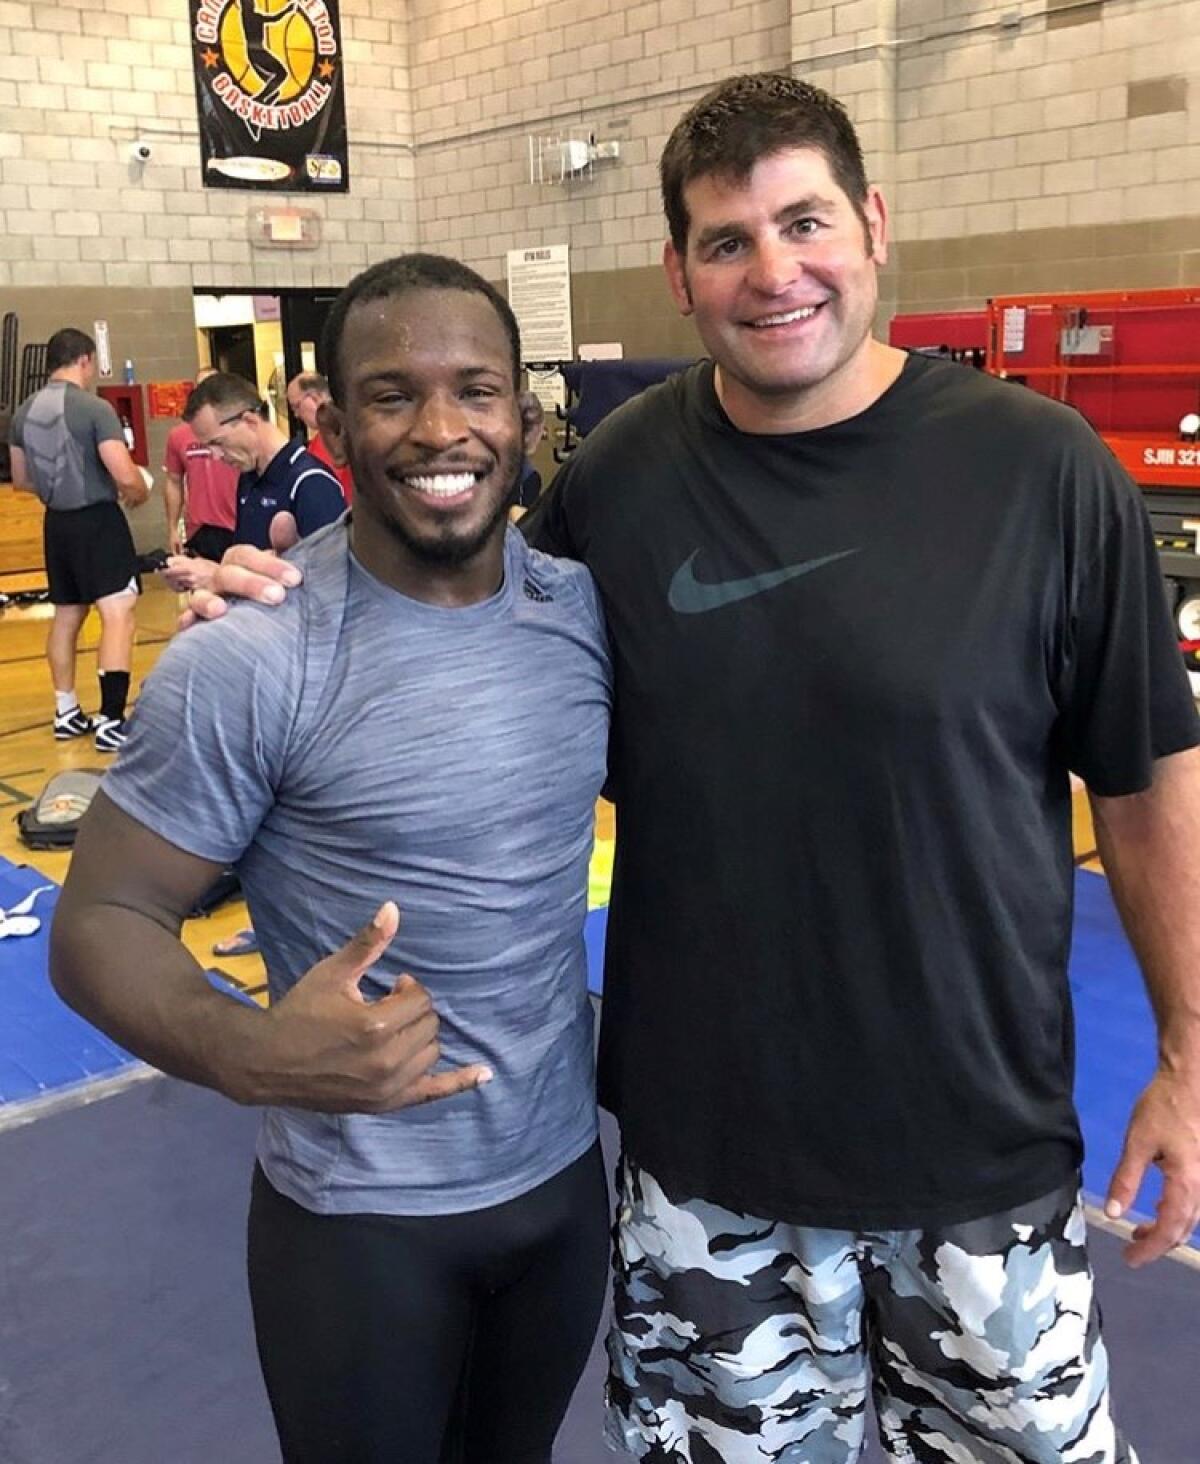 Rich Perry poses with Stephen Neal in 2018 during a USA Wrestling training camp at Camp Pendelton, two days before his injury